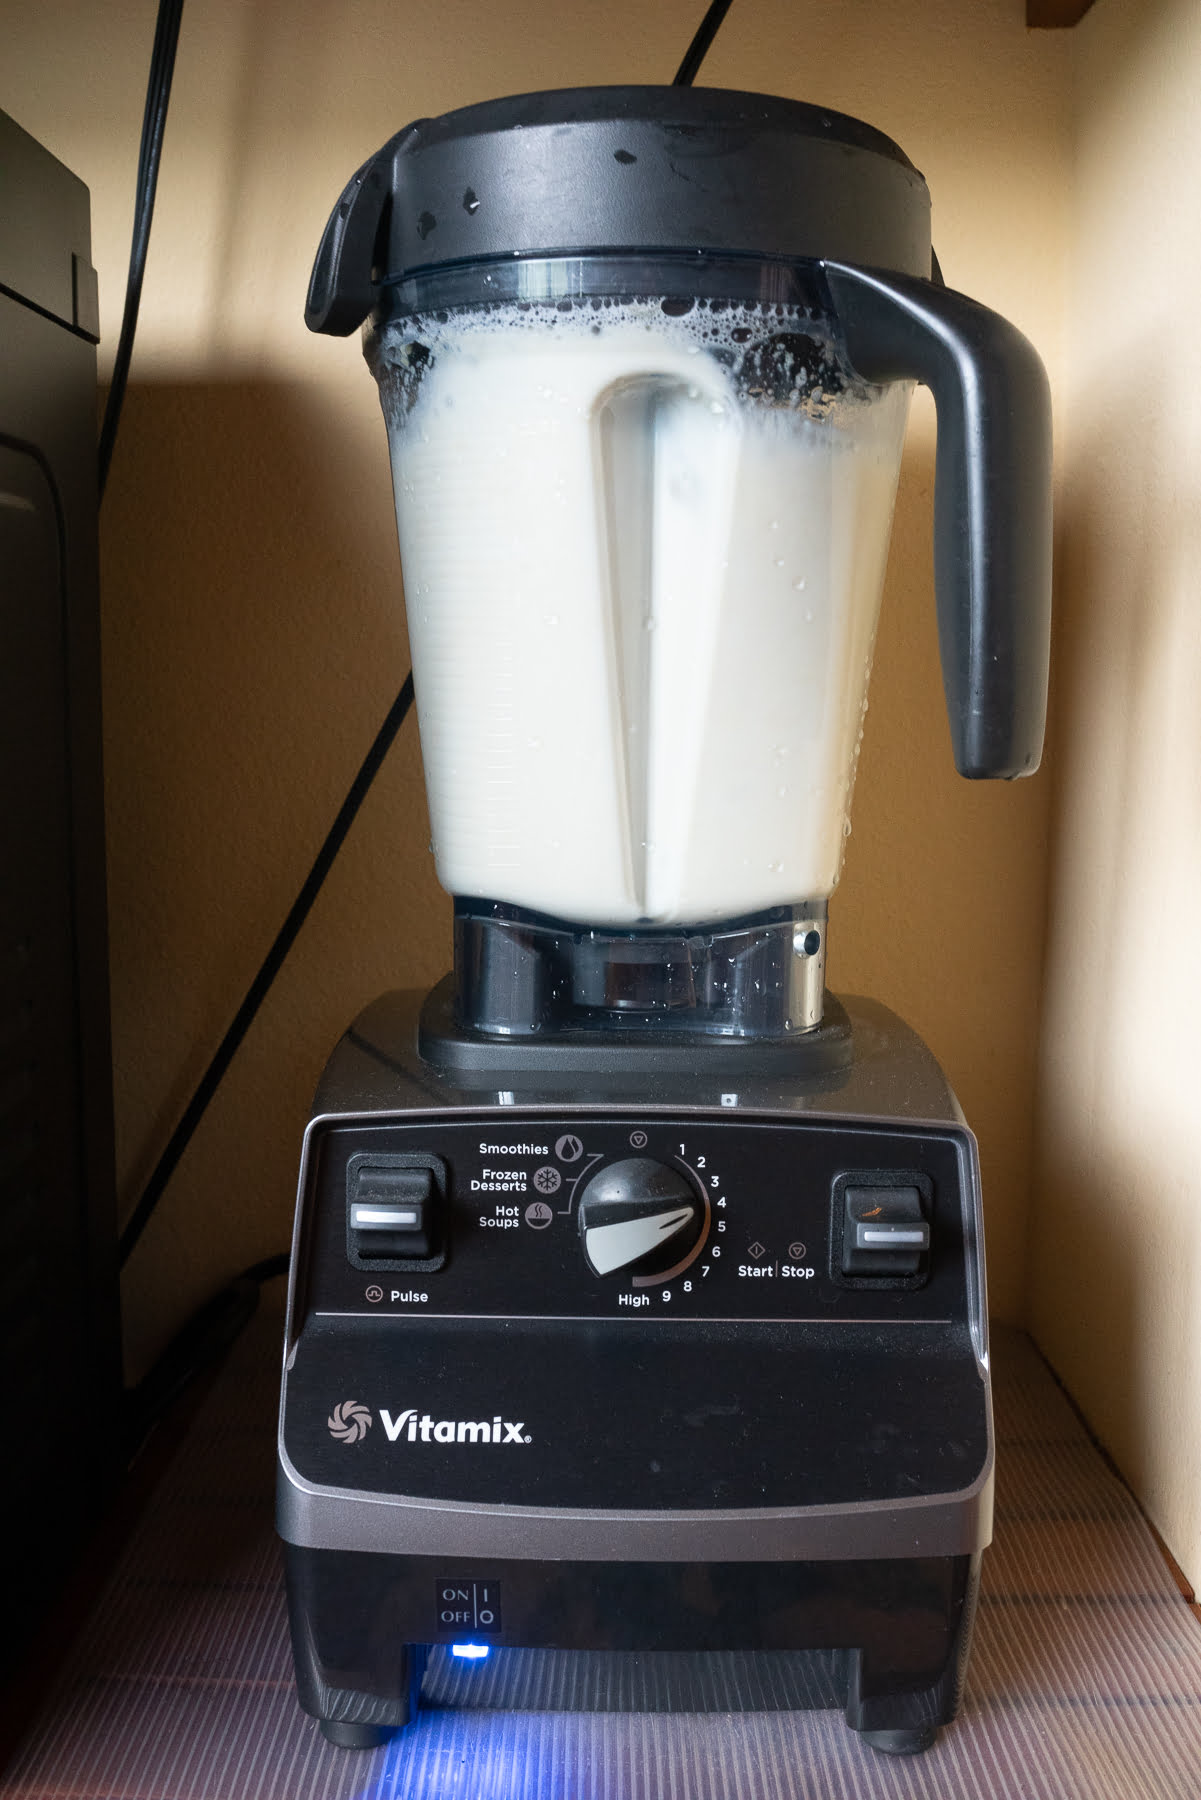 Blending soaked soybeans and water in the Vitamix.